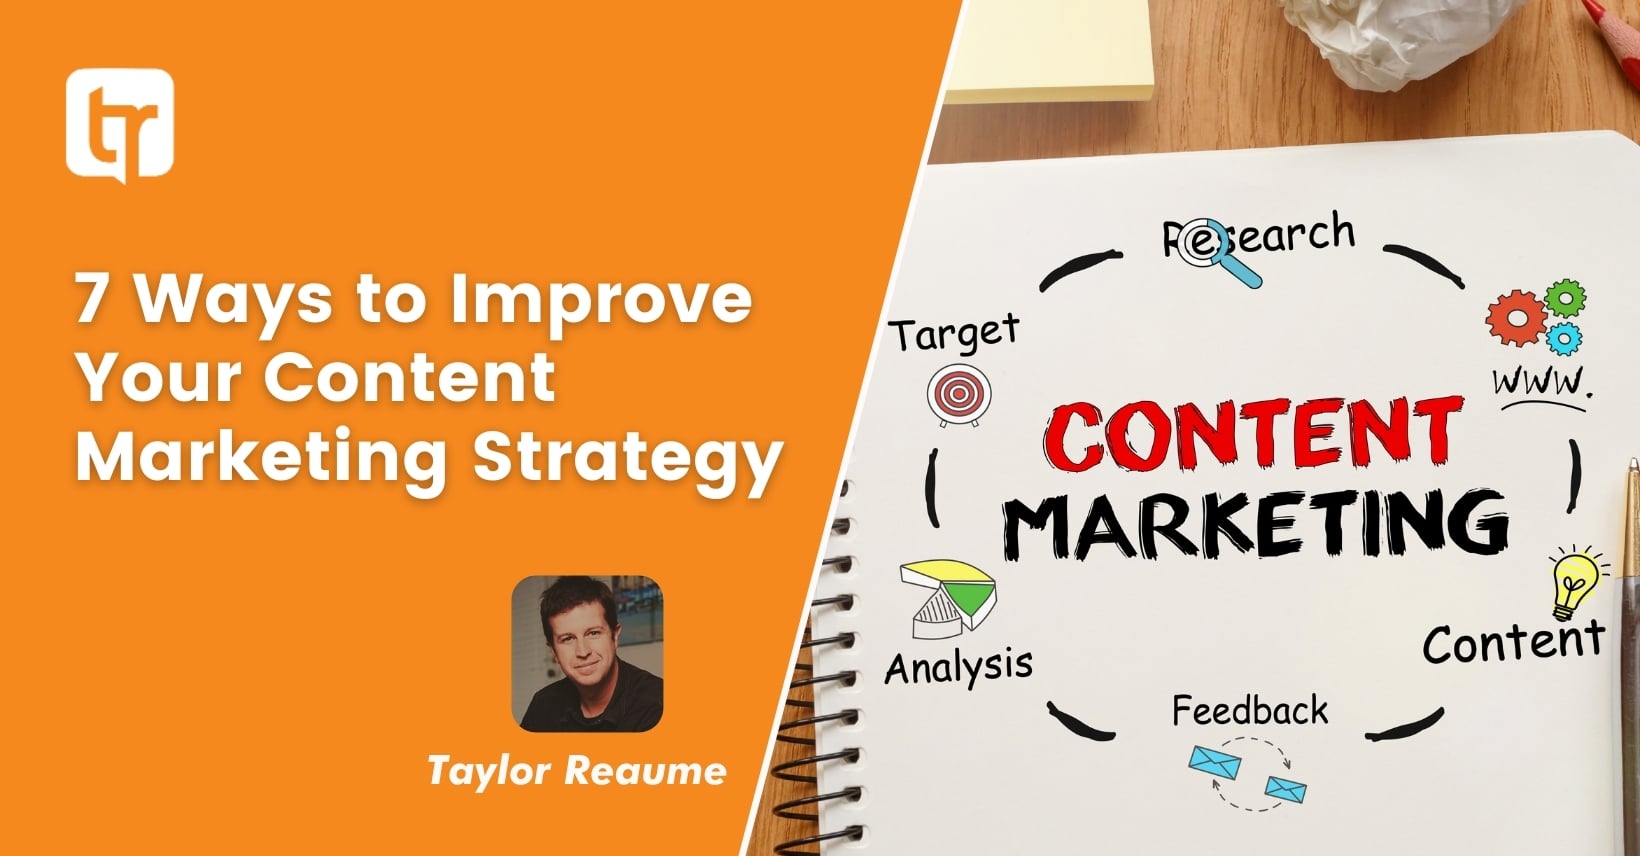 7 Ways to Improve Your Content Marketing Strategy